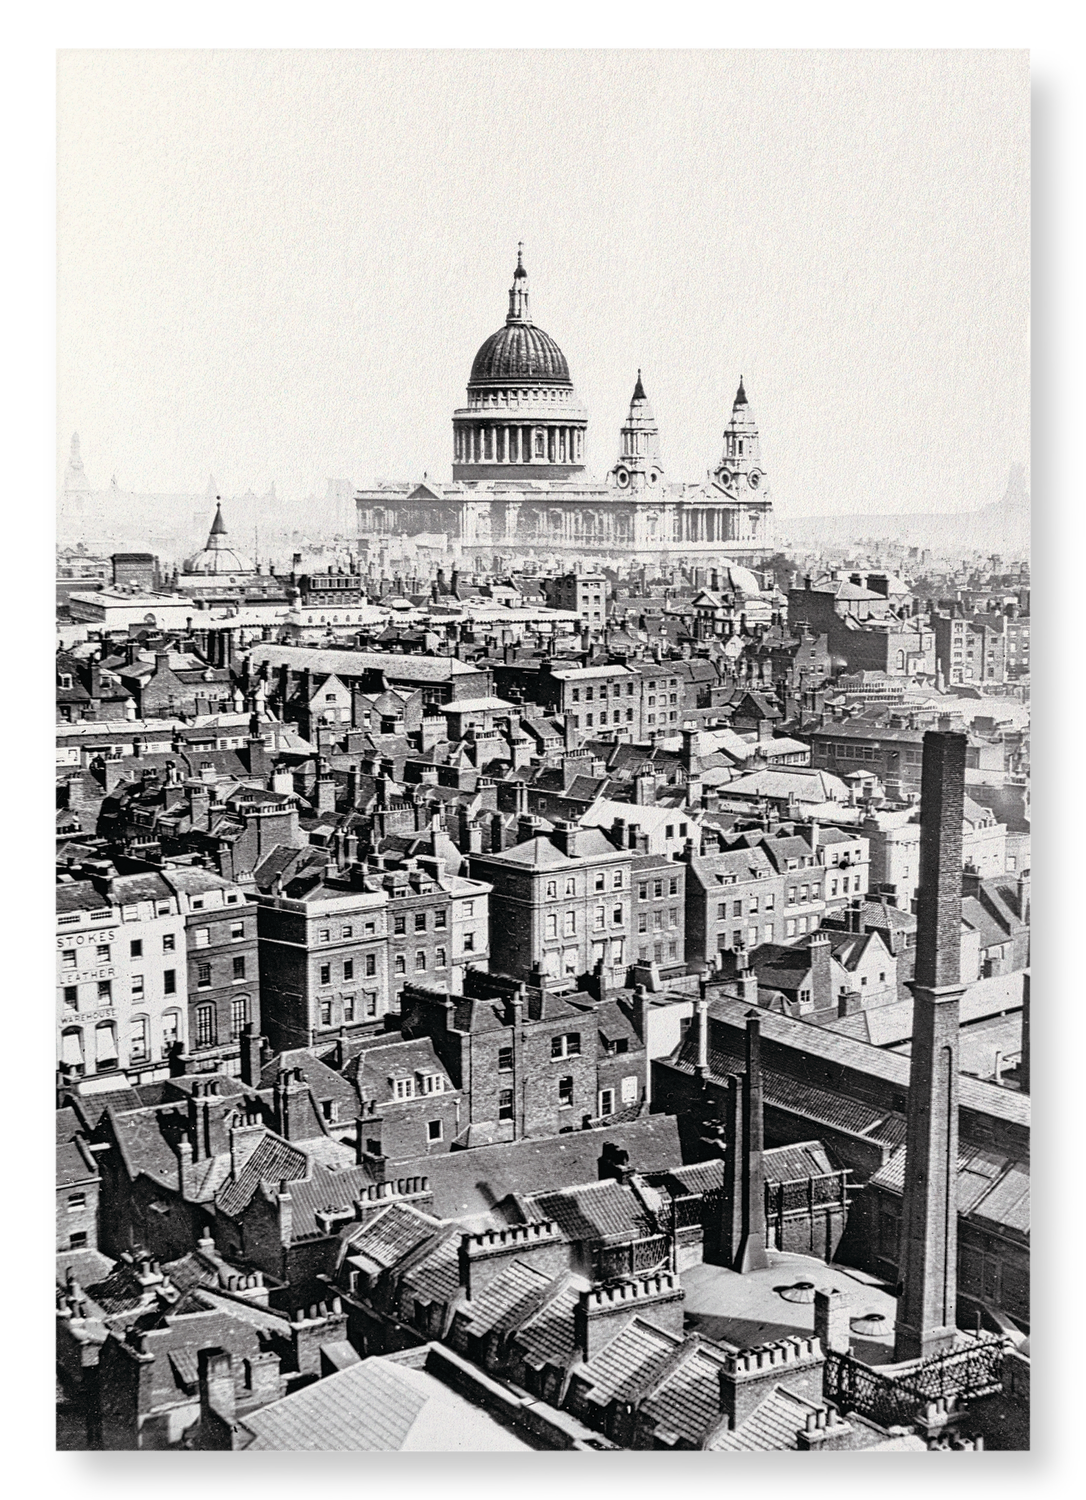 VIEW OVER ROOFTOPS OF LONDON (1865)